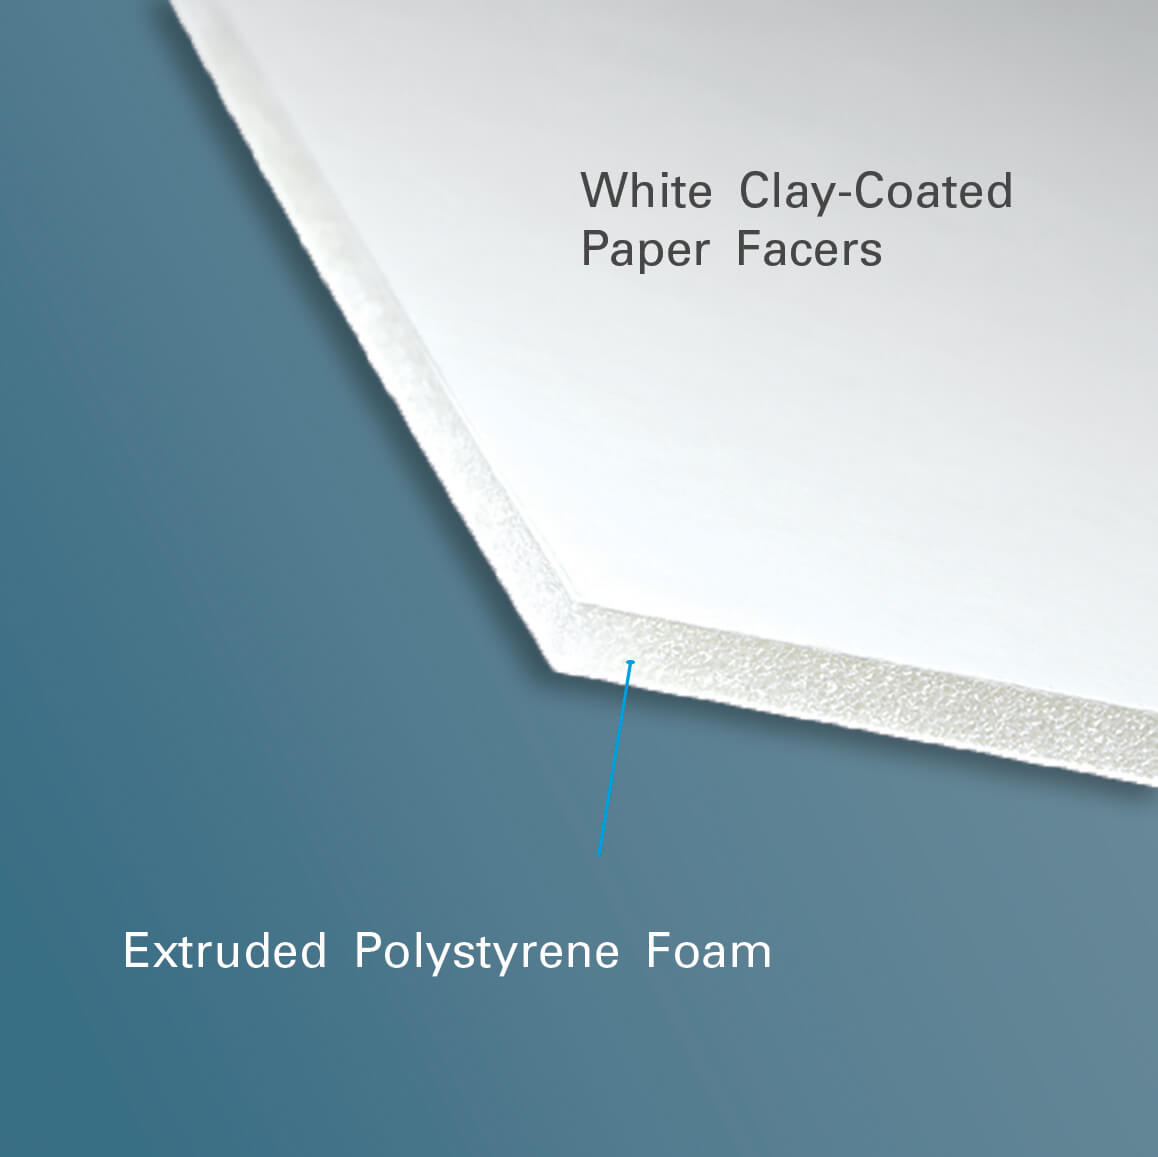 corner angle image showing the white clay-coated paper facers and extruded polystyrene foam core